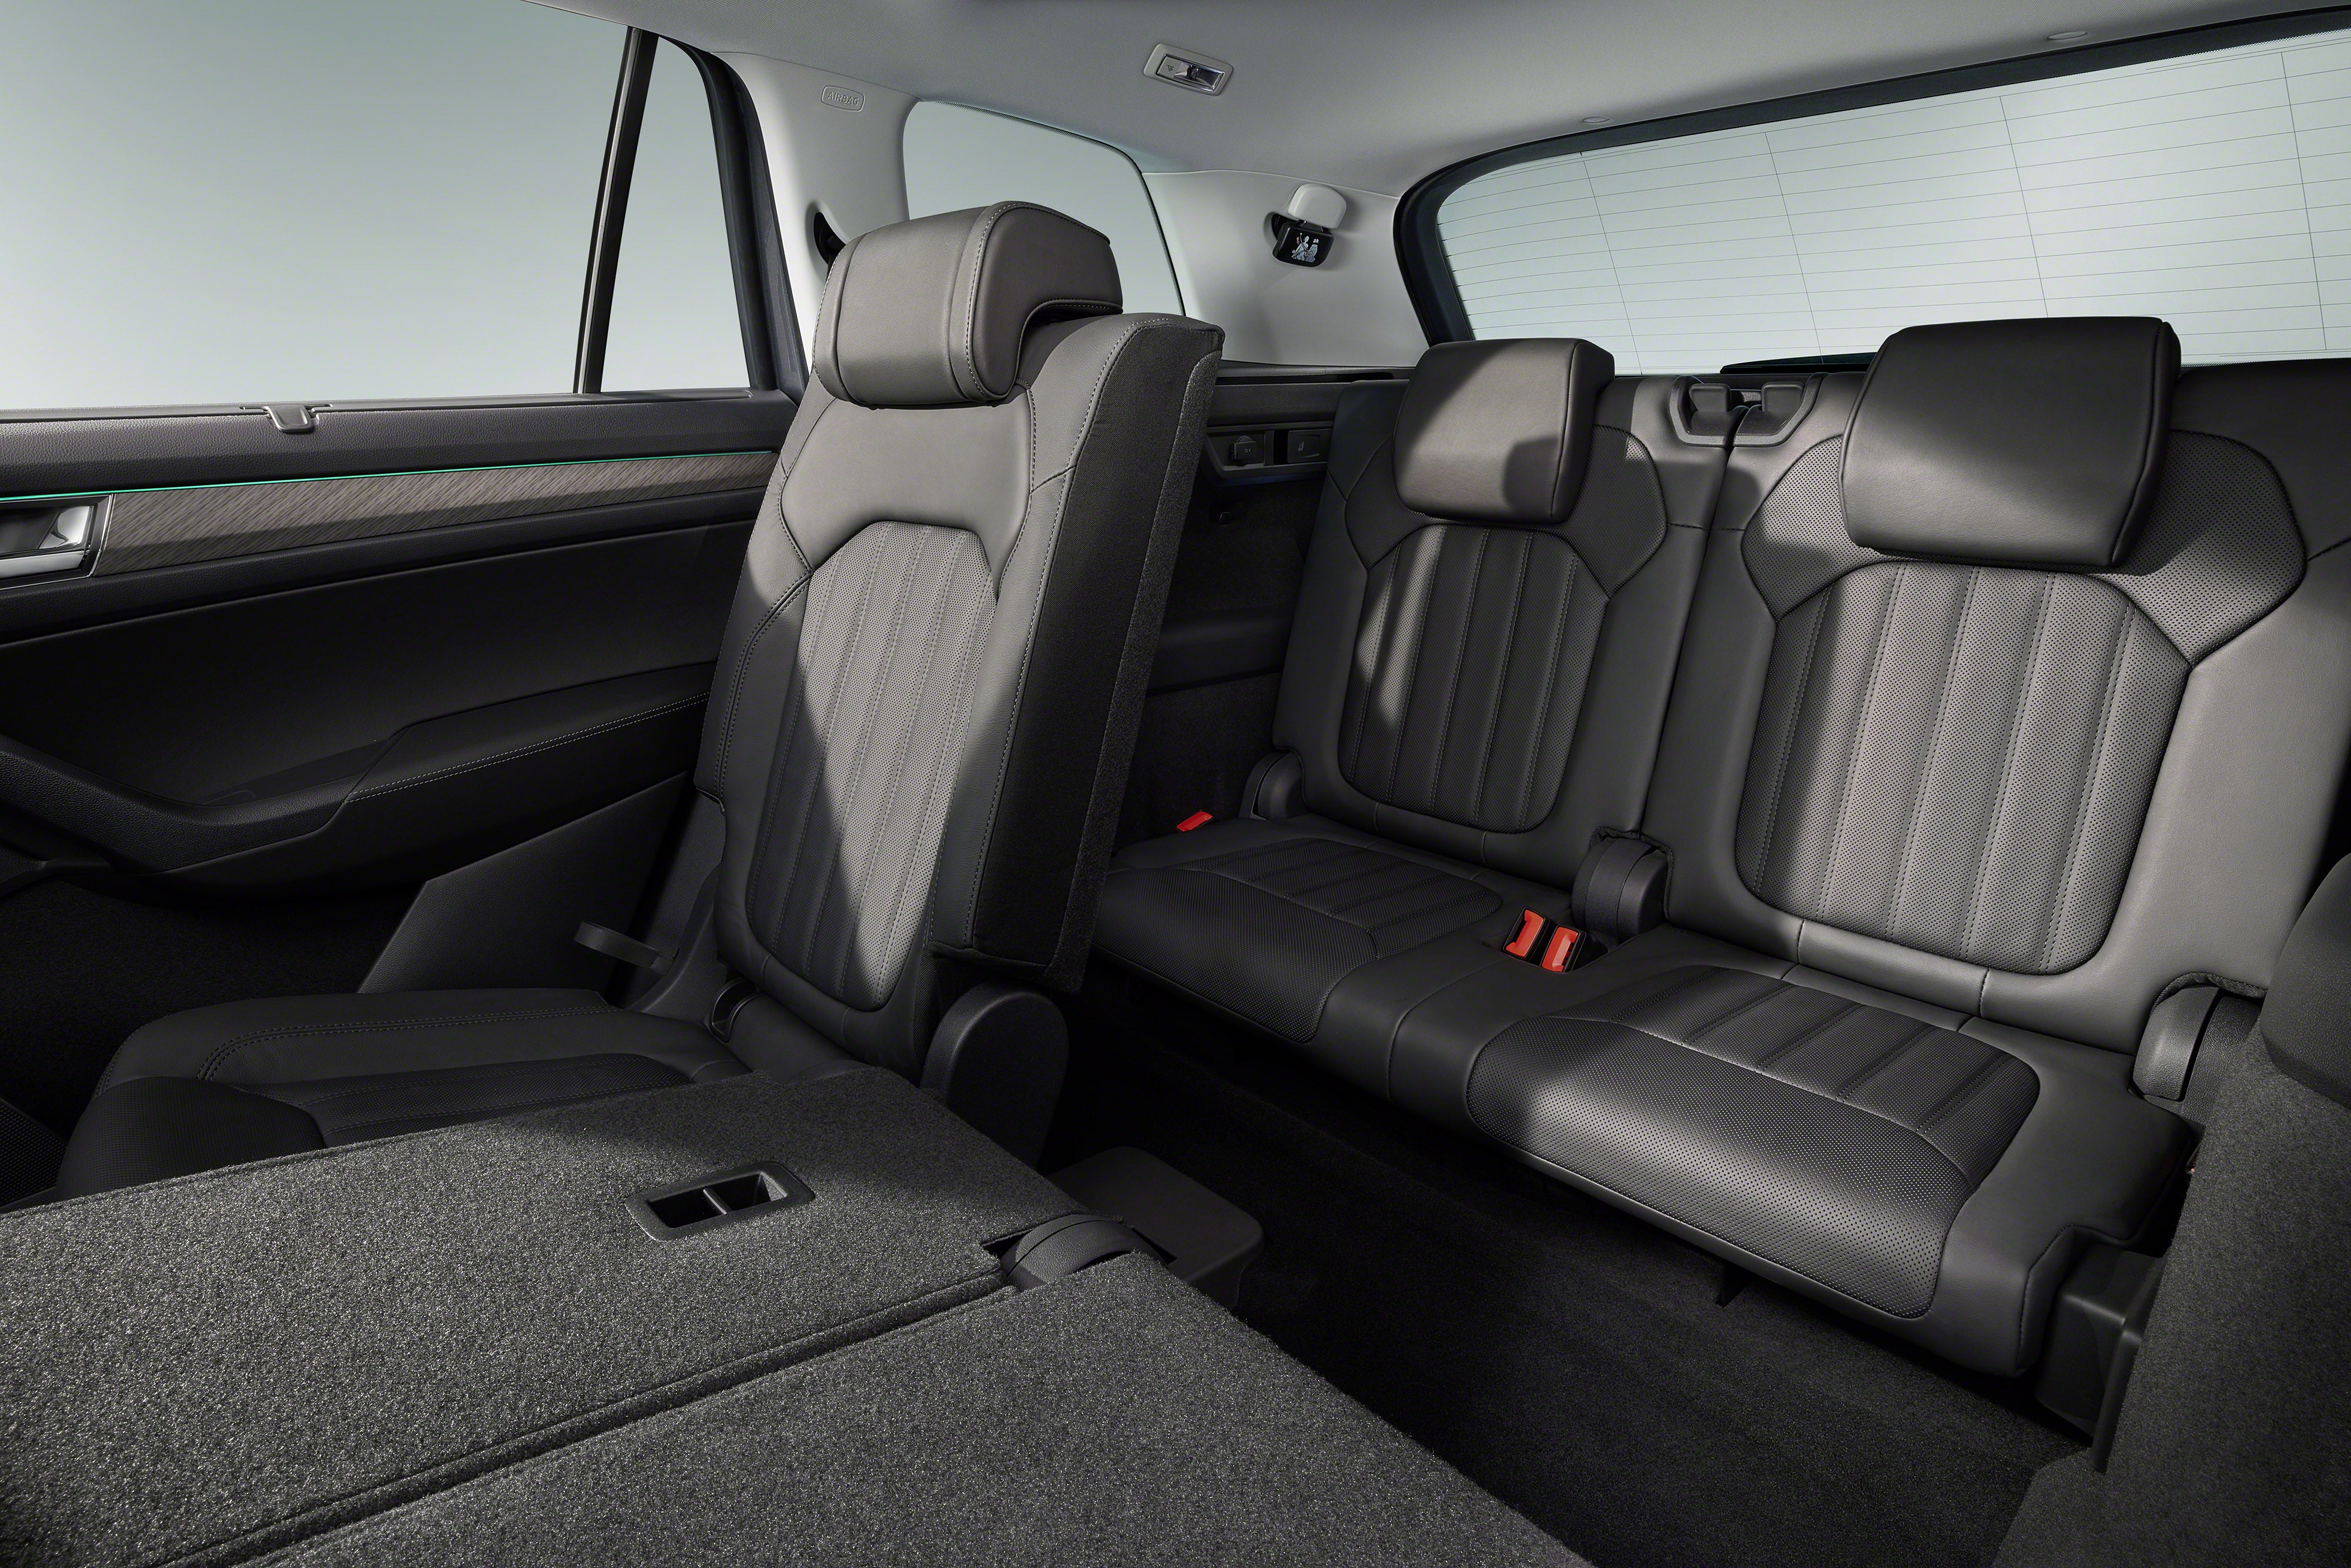 It’s perfectly comfortable in the rear seats, provided you’re below average height